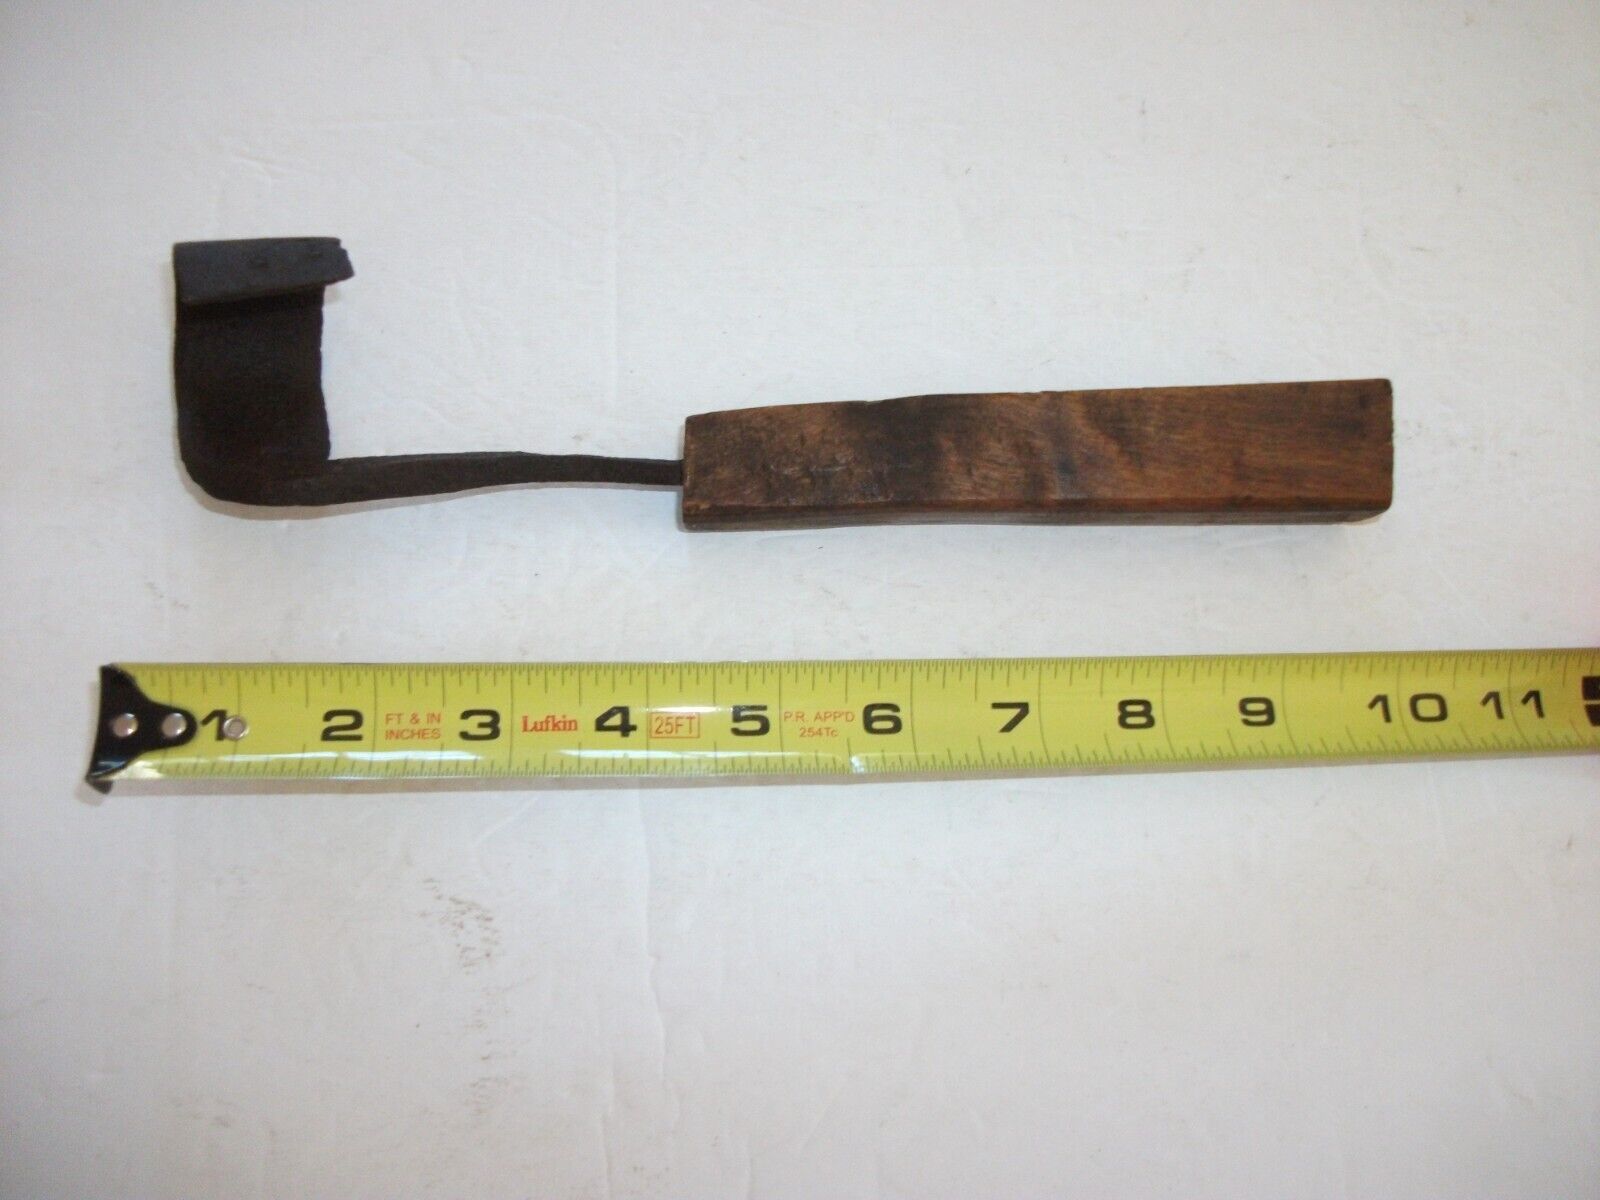 Old Antique Wood Carving Draw Knife Tool